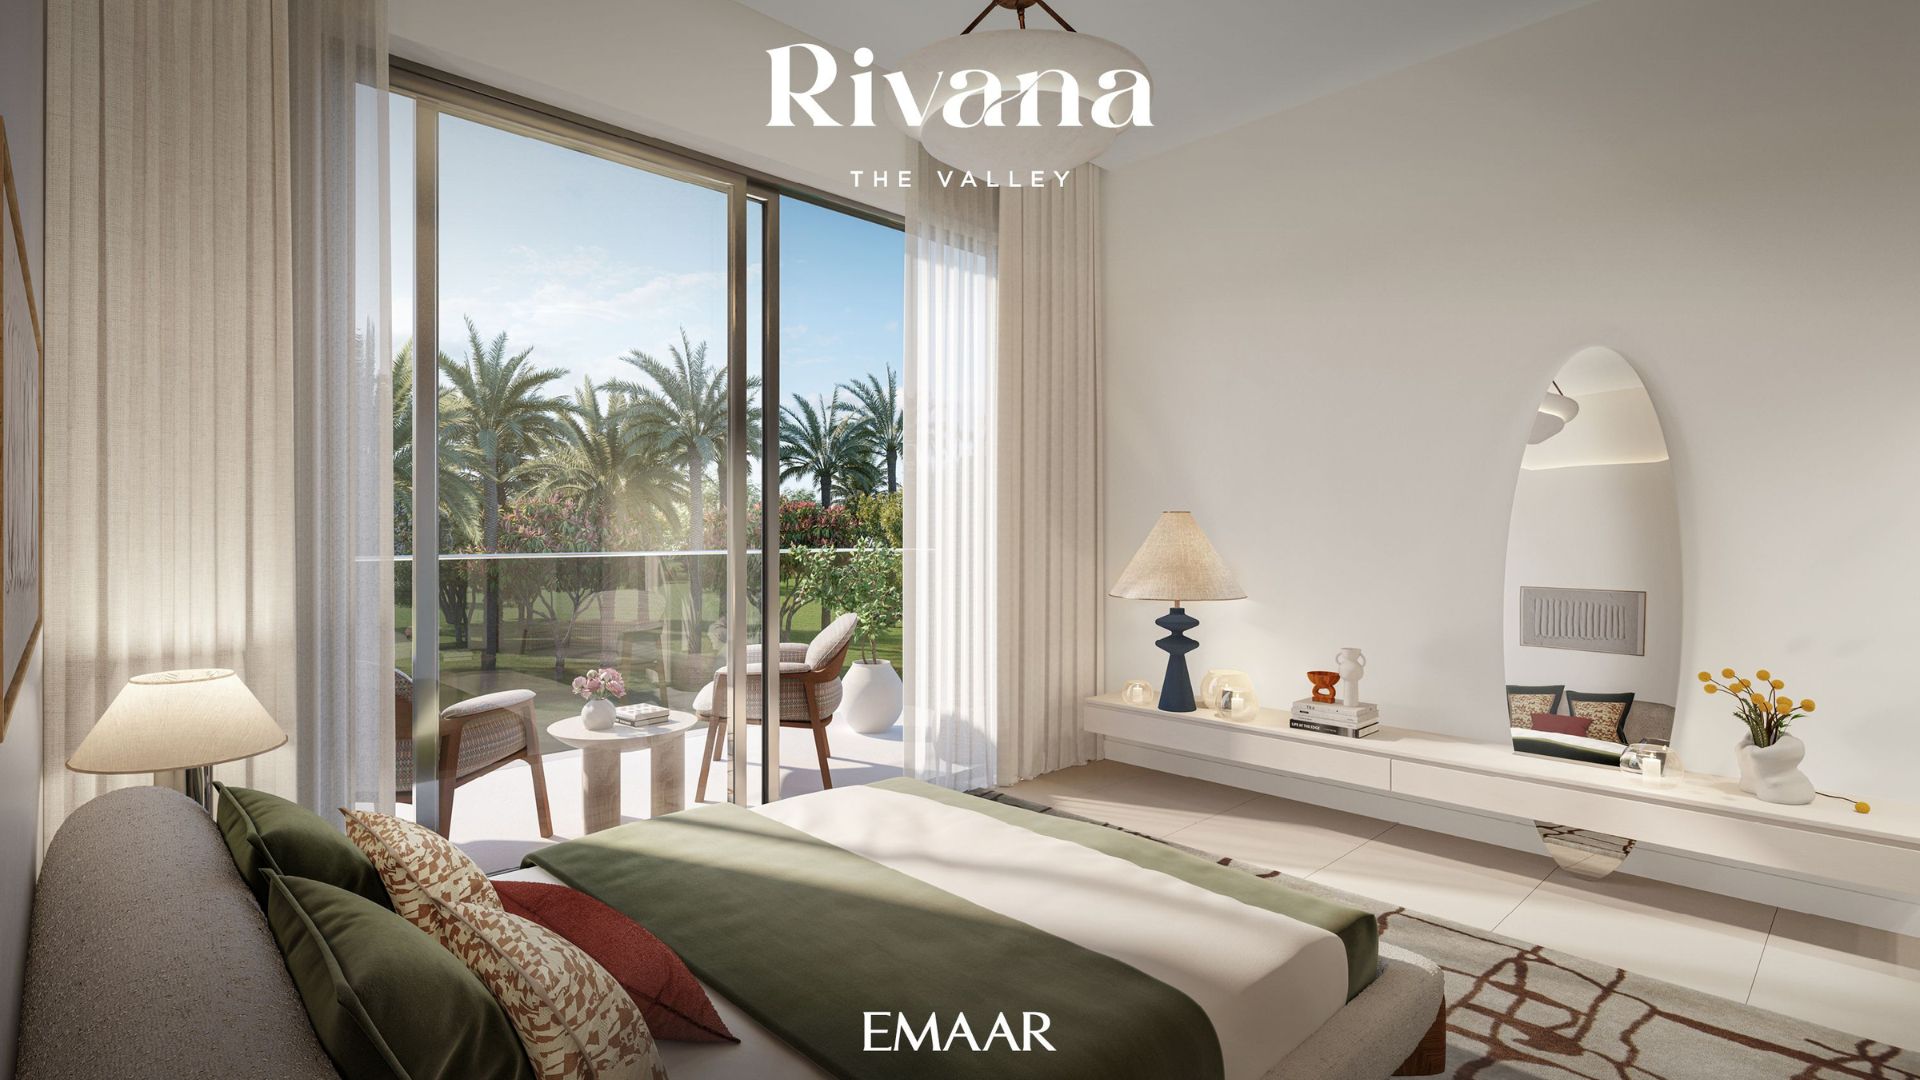 Rivana at The Valley by Emaar